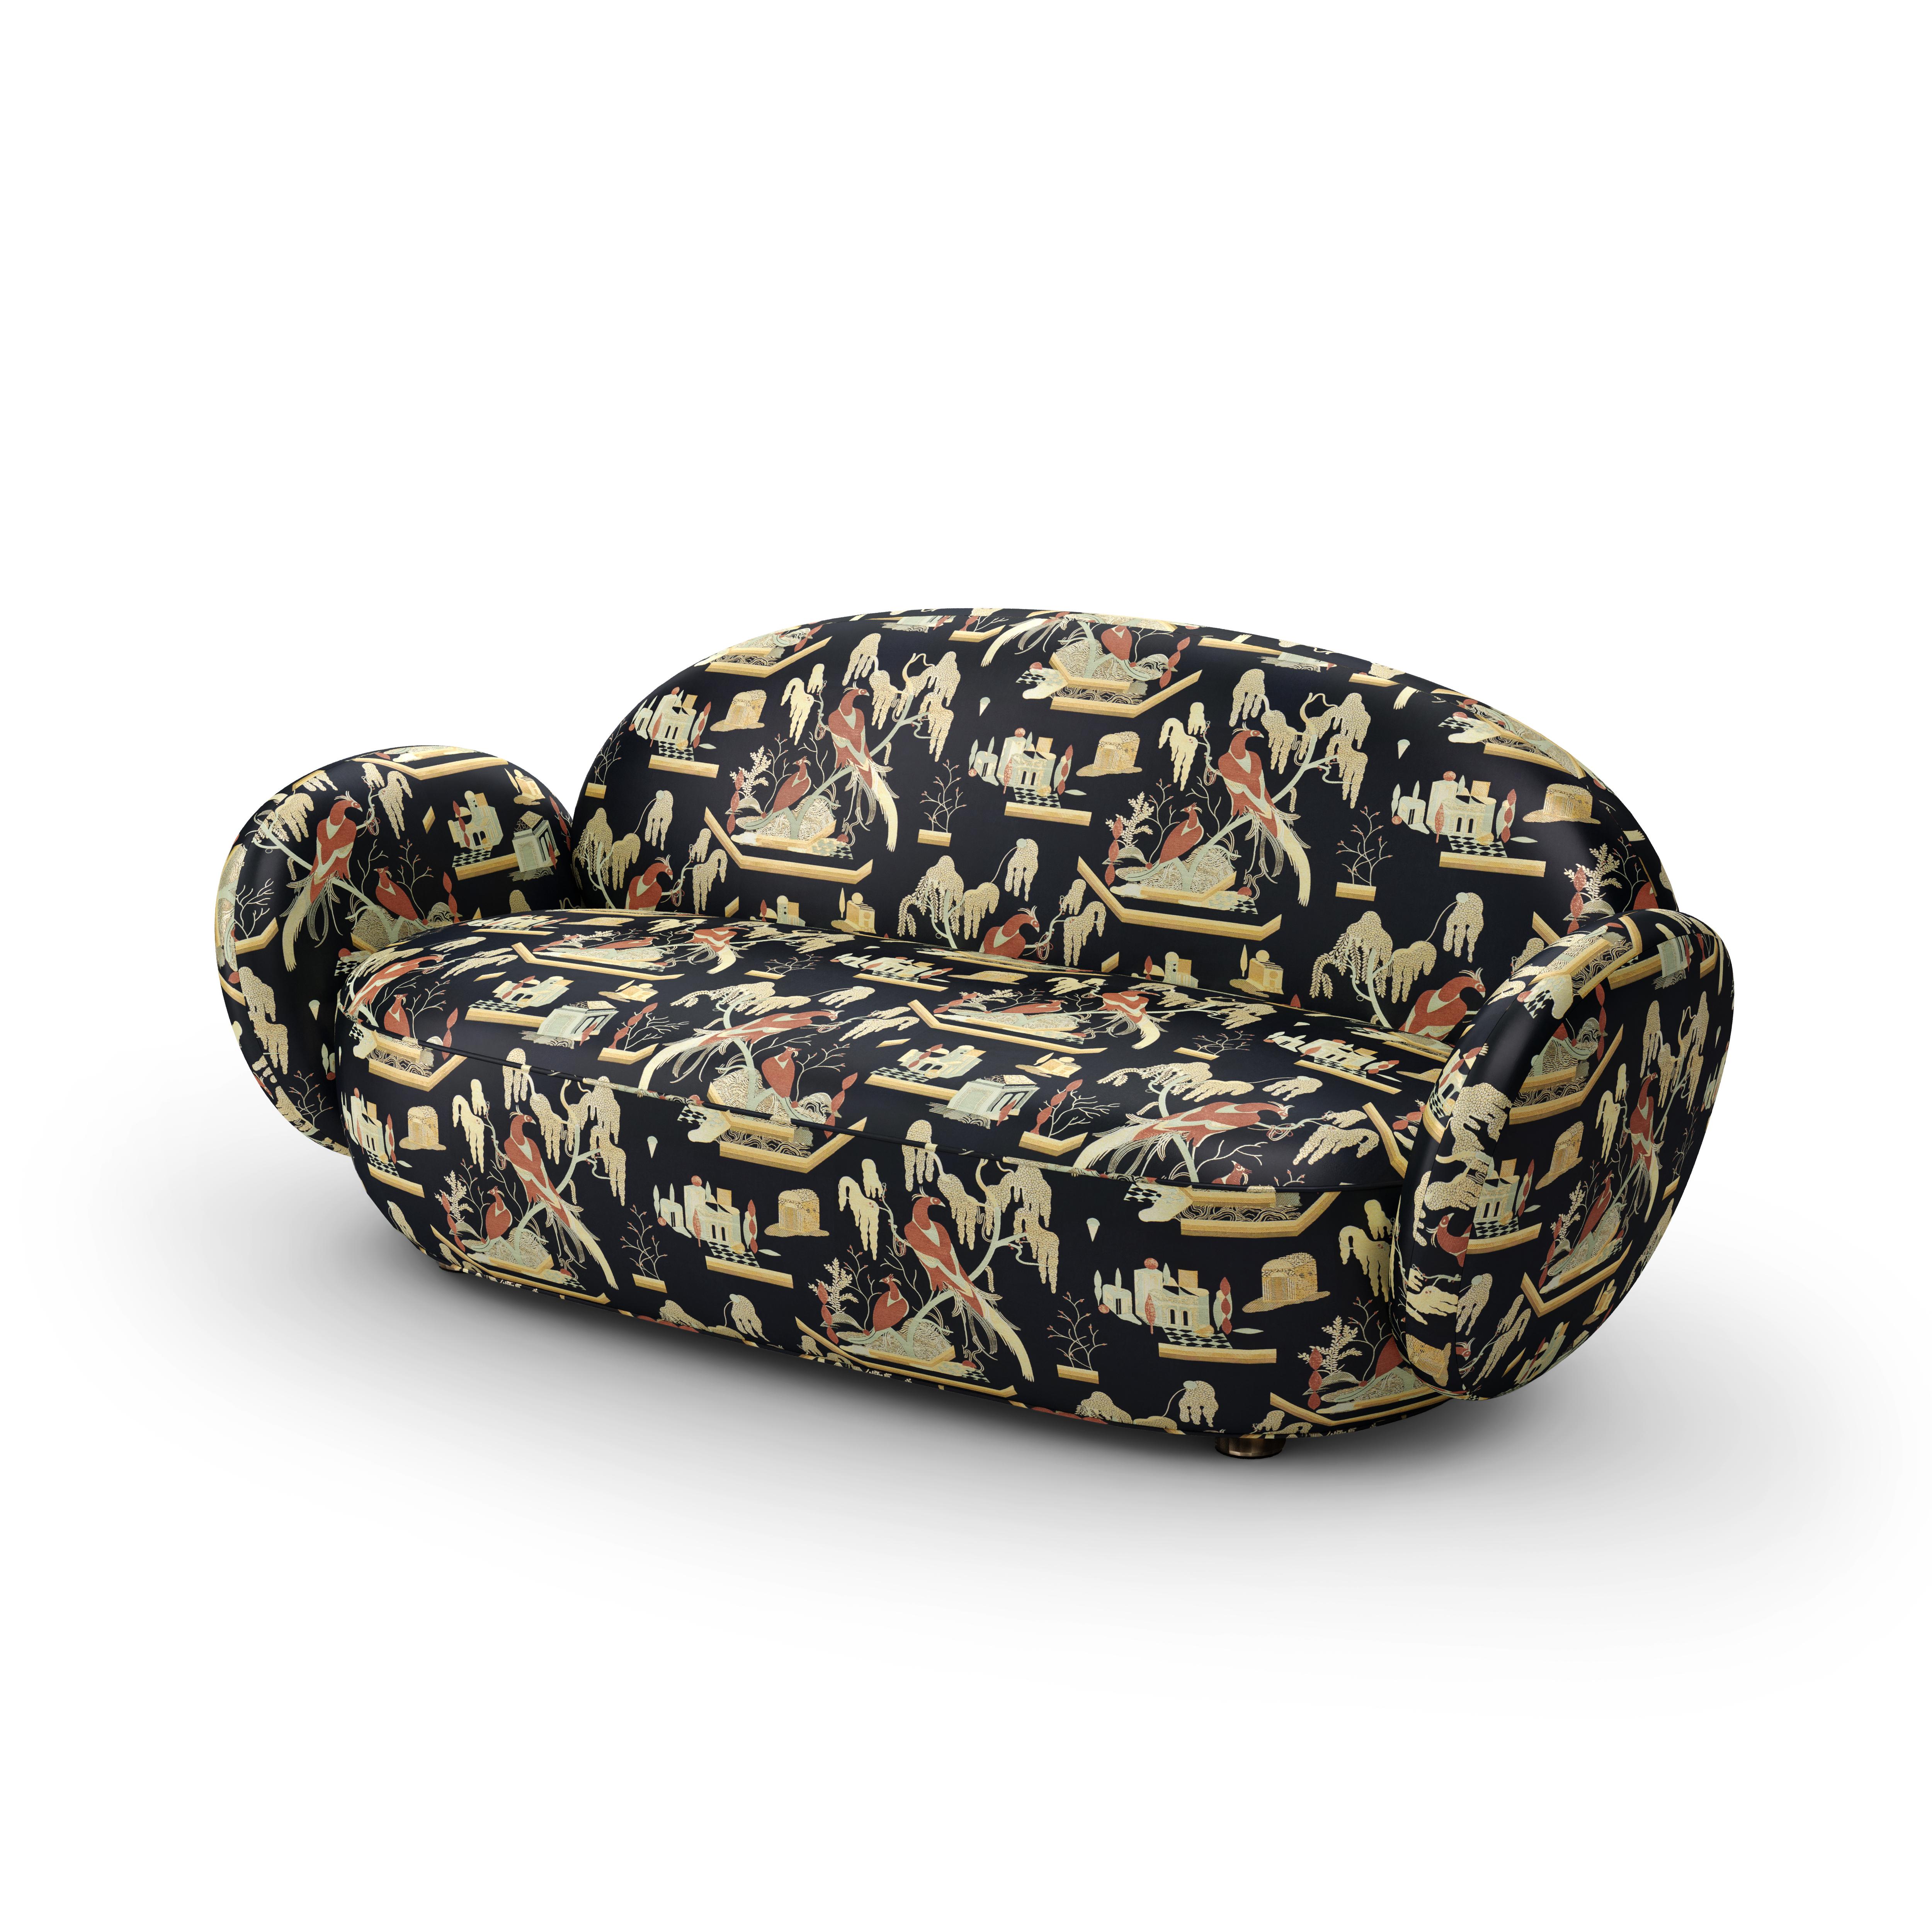 Dolce Sofa is an exquisite and ergonomically perfect three seater sofa upholstered in the plush jacquard fabric, This Must Be The Place by Dedar Milano. Ideal for playful lazing! Designed by Matteo Cibic. Upholstery customisation is available upon